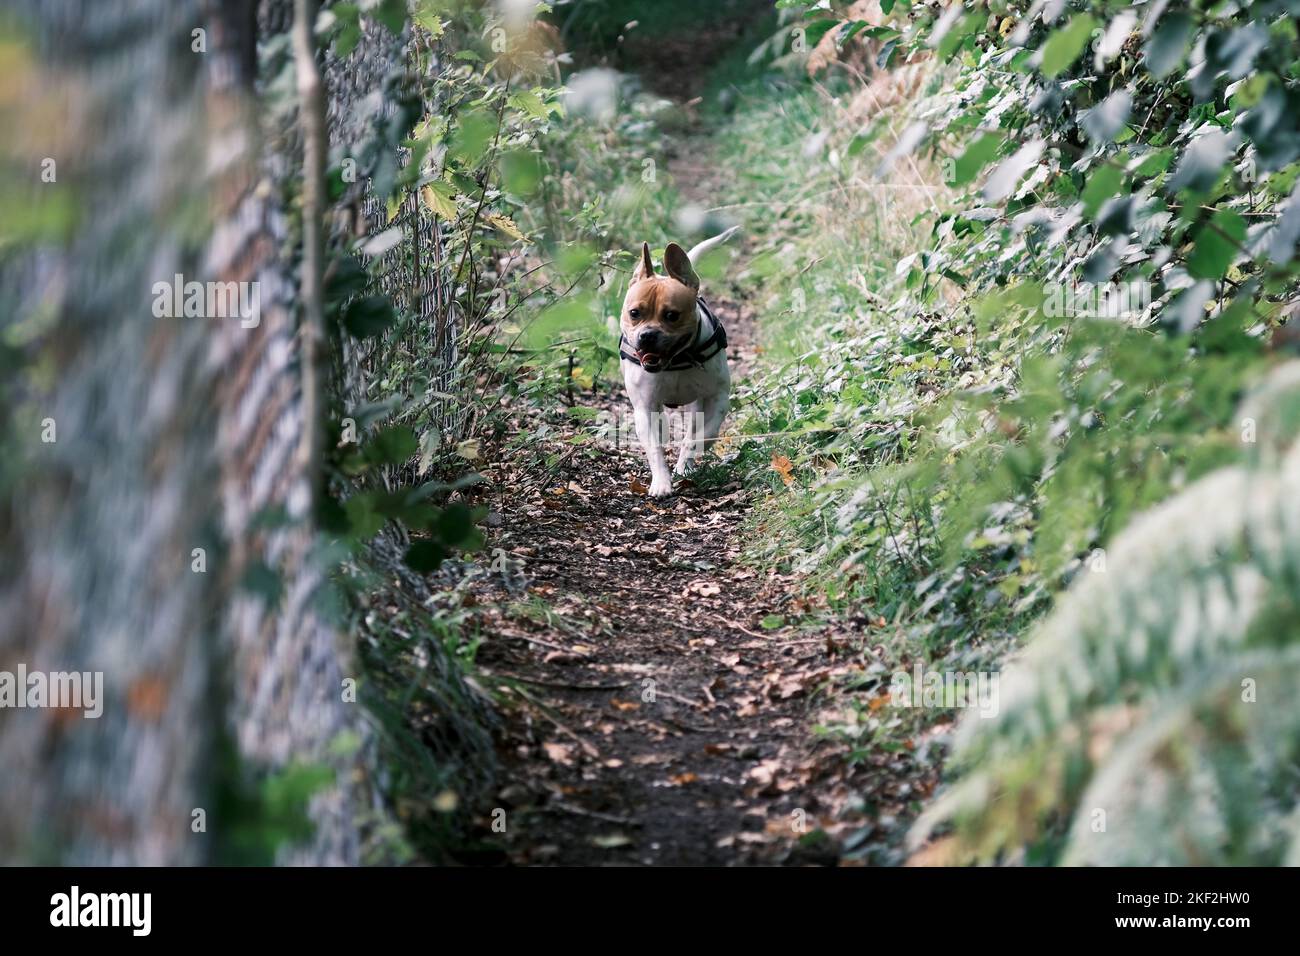 Adorable dog having fun in the woods. Probably up to no good. Running through wooded path next to a chain link fence. Staffordshire bull terrier cross. Stock Photo